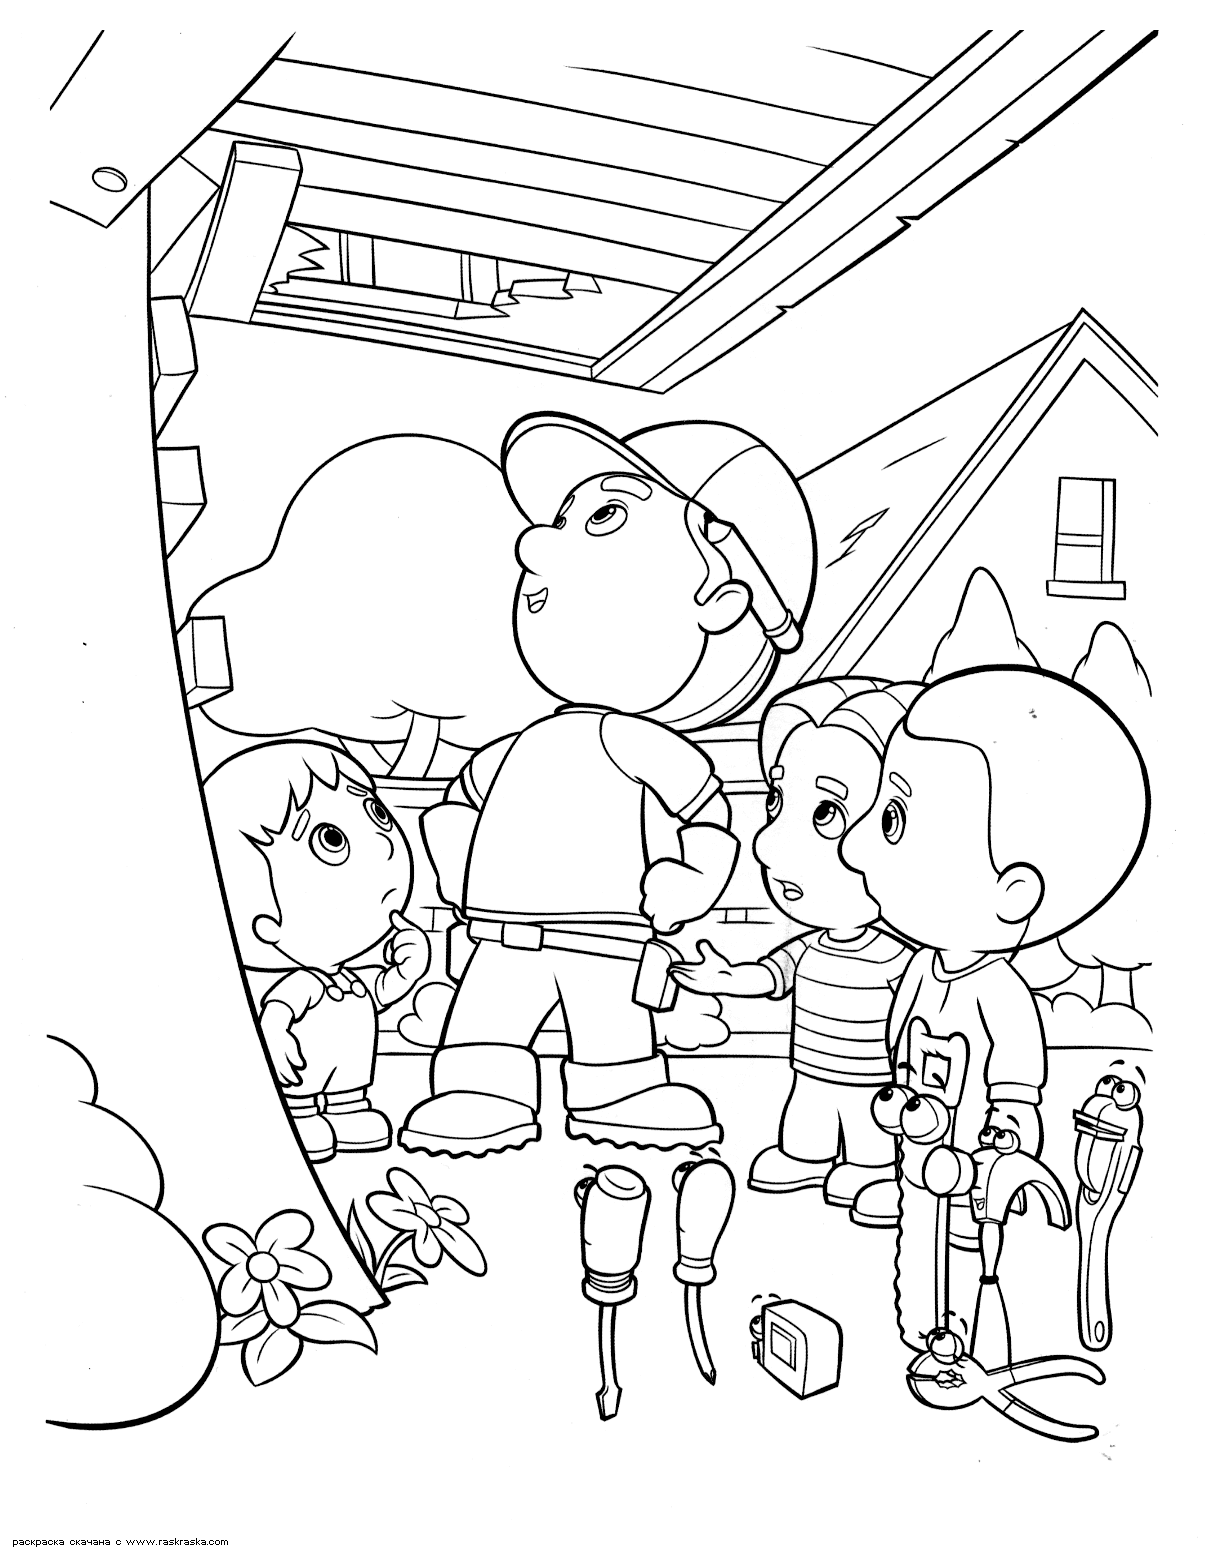 coloring-of-many-and-its-tools-to-download-for-free-handy-manny-kids-coloring-pages